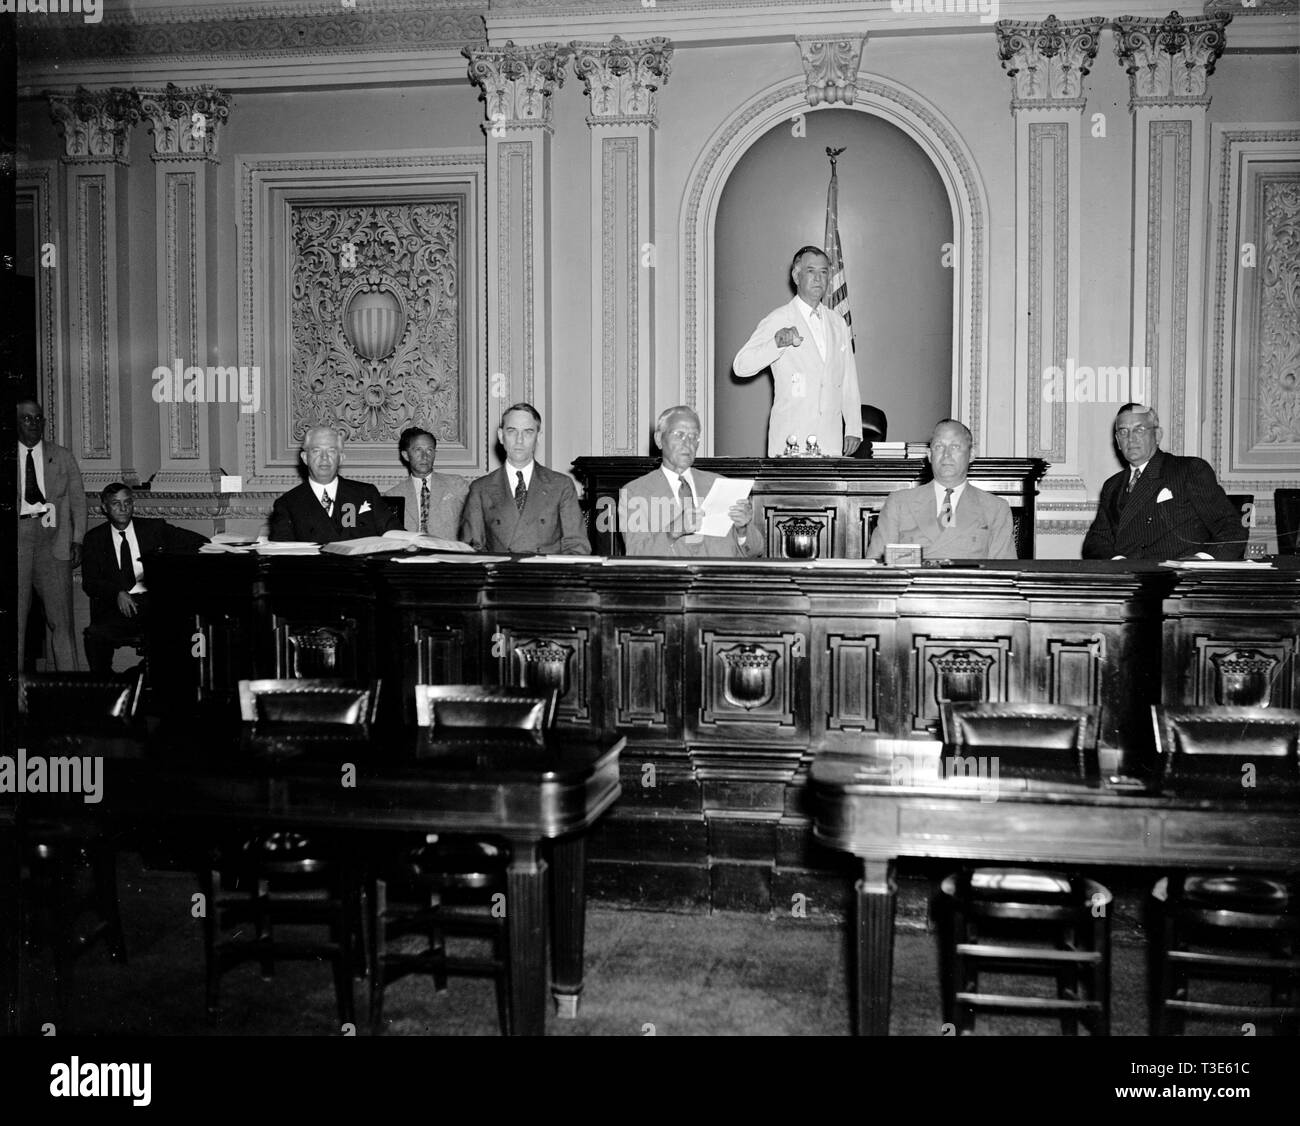 While Vice President Garner is vacationing in Texas during the next few weeks, Senator Key Pittman, President Pro Tem will preside over the Senate. Senator Pittman is shown with other officers of the Senate as the session opened this morning. Left to right: Chesley W. Jurney, Sergeant at Arms; Leslie L. Biffle, Secretary to the Majority; Charles L. Watkins, Parliamentarian and Journal Clerk; John C. Crockett, Cheif Clerk; Senator Key Pittman; Emery L. Frazier, Legislative Clerk; and Col. Edwin A. Halsey, Secretary. 6/14/37 Stock Photo